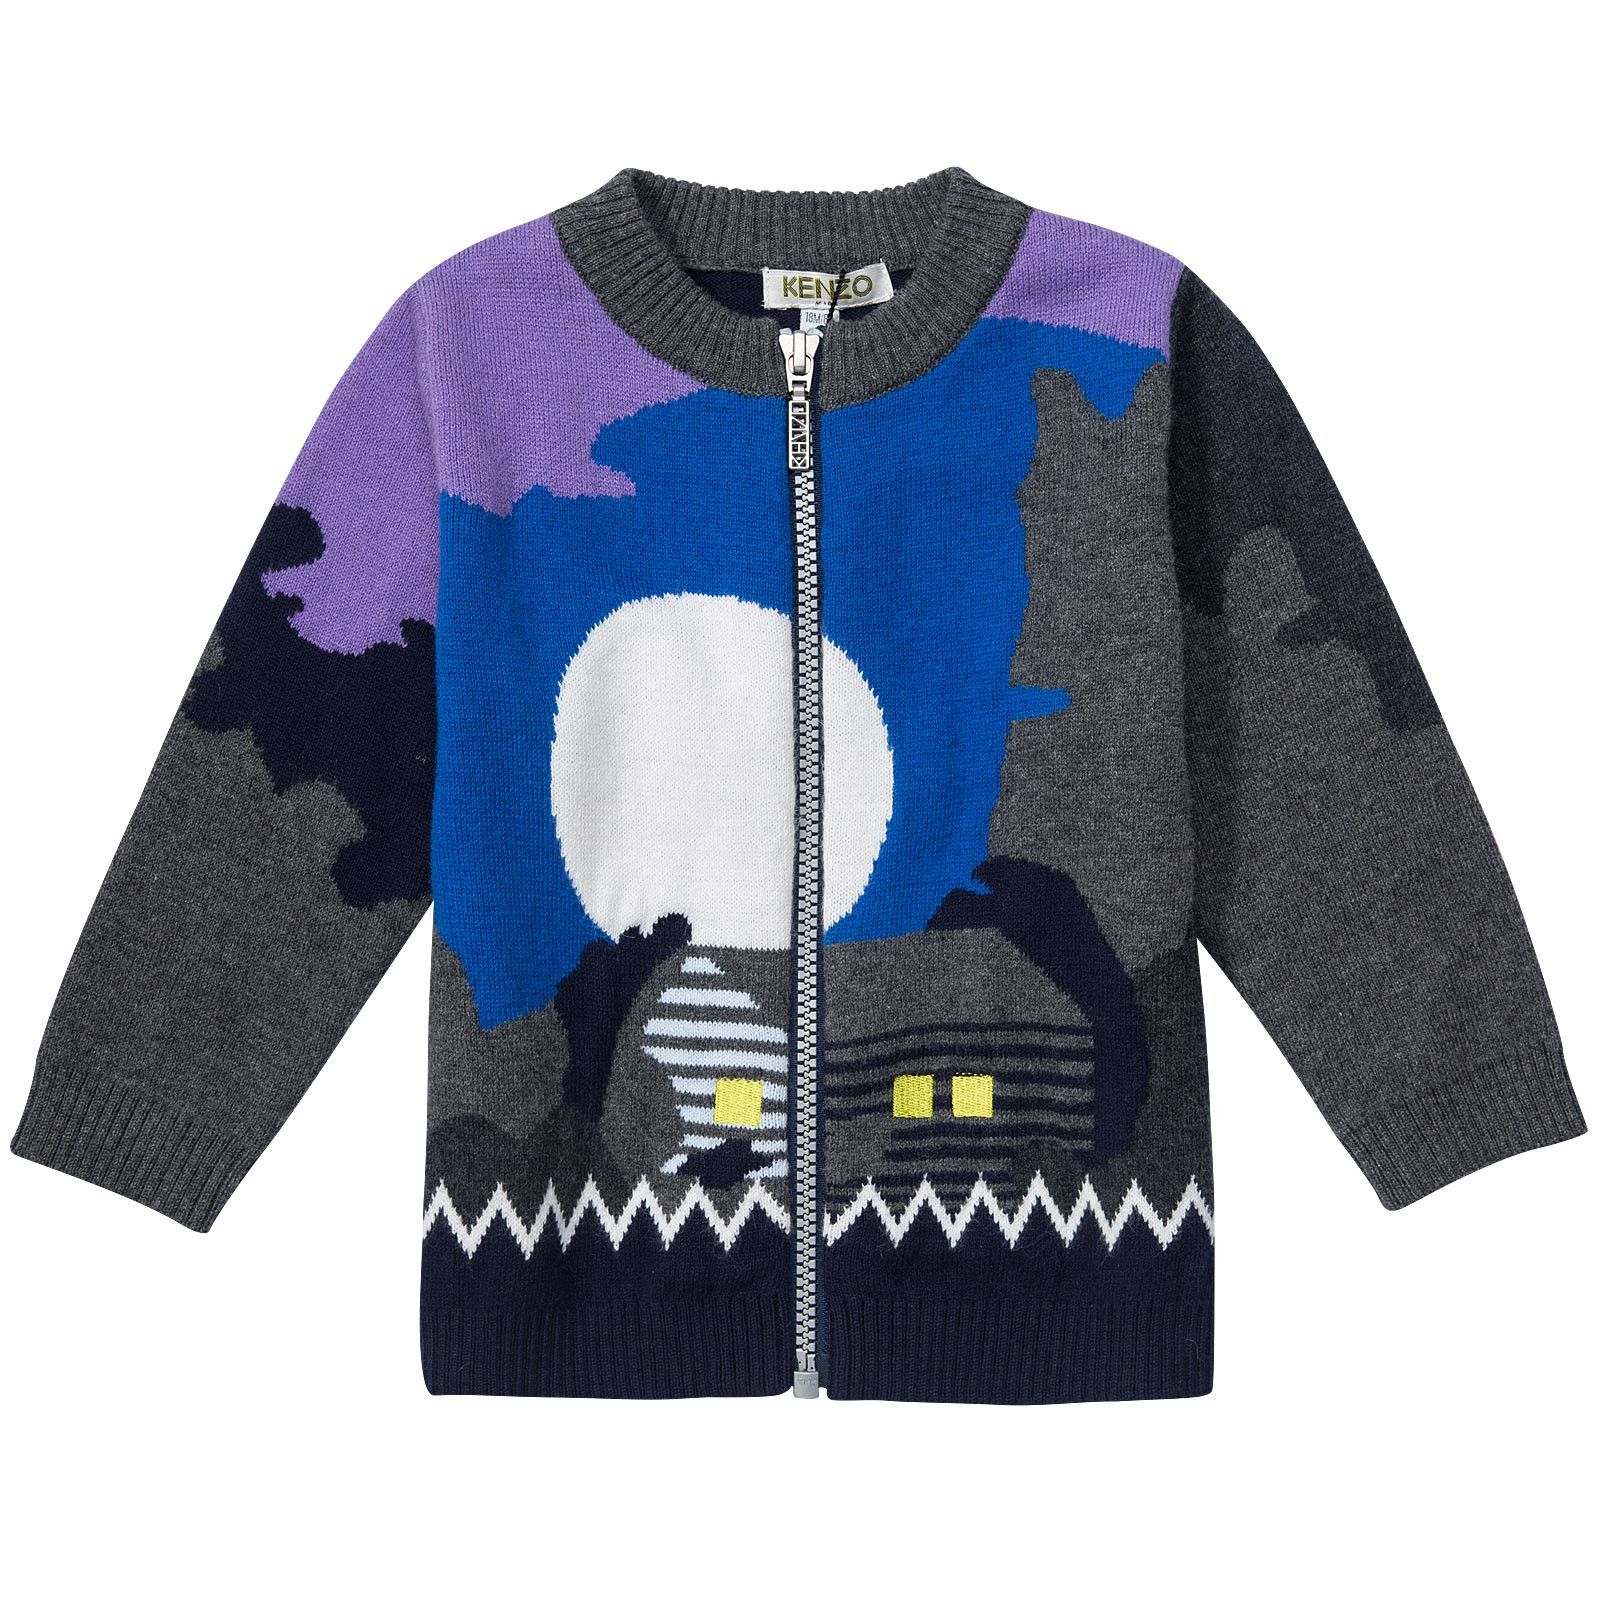 Baby Boys Blue Kintted Zip-up Cardigan - CÉMAROSE | Children's Fashion Store - 1